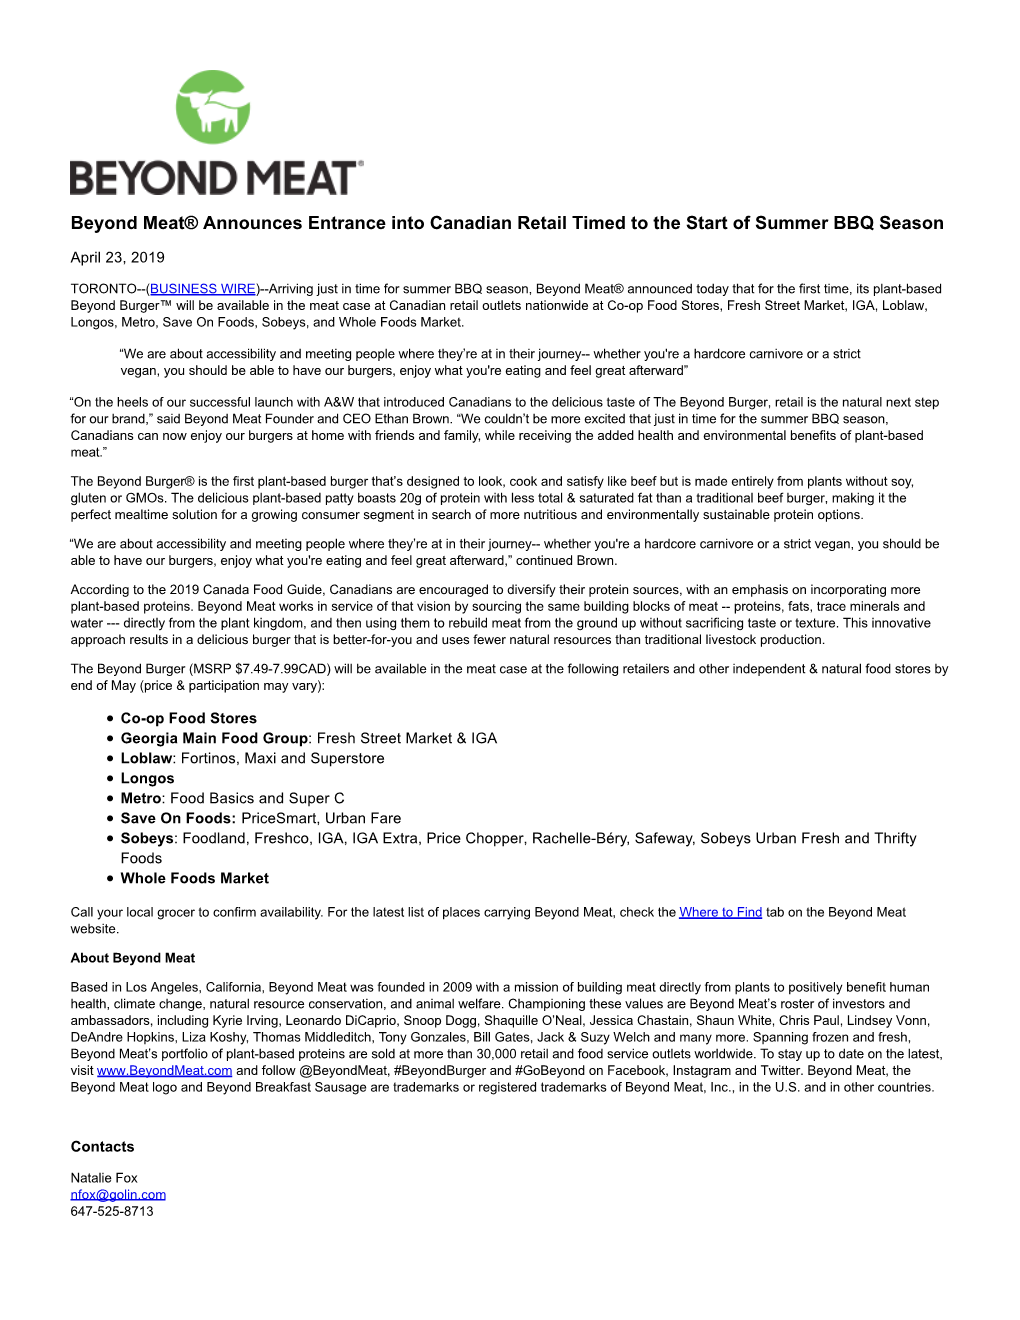 Beyond Meat® Announces Entrance Into Canadian Retail Timed to the Start of Summer BBQ Season